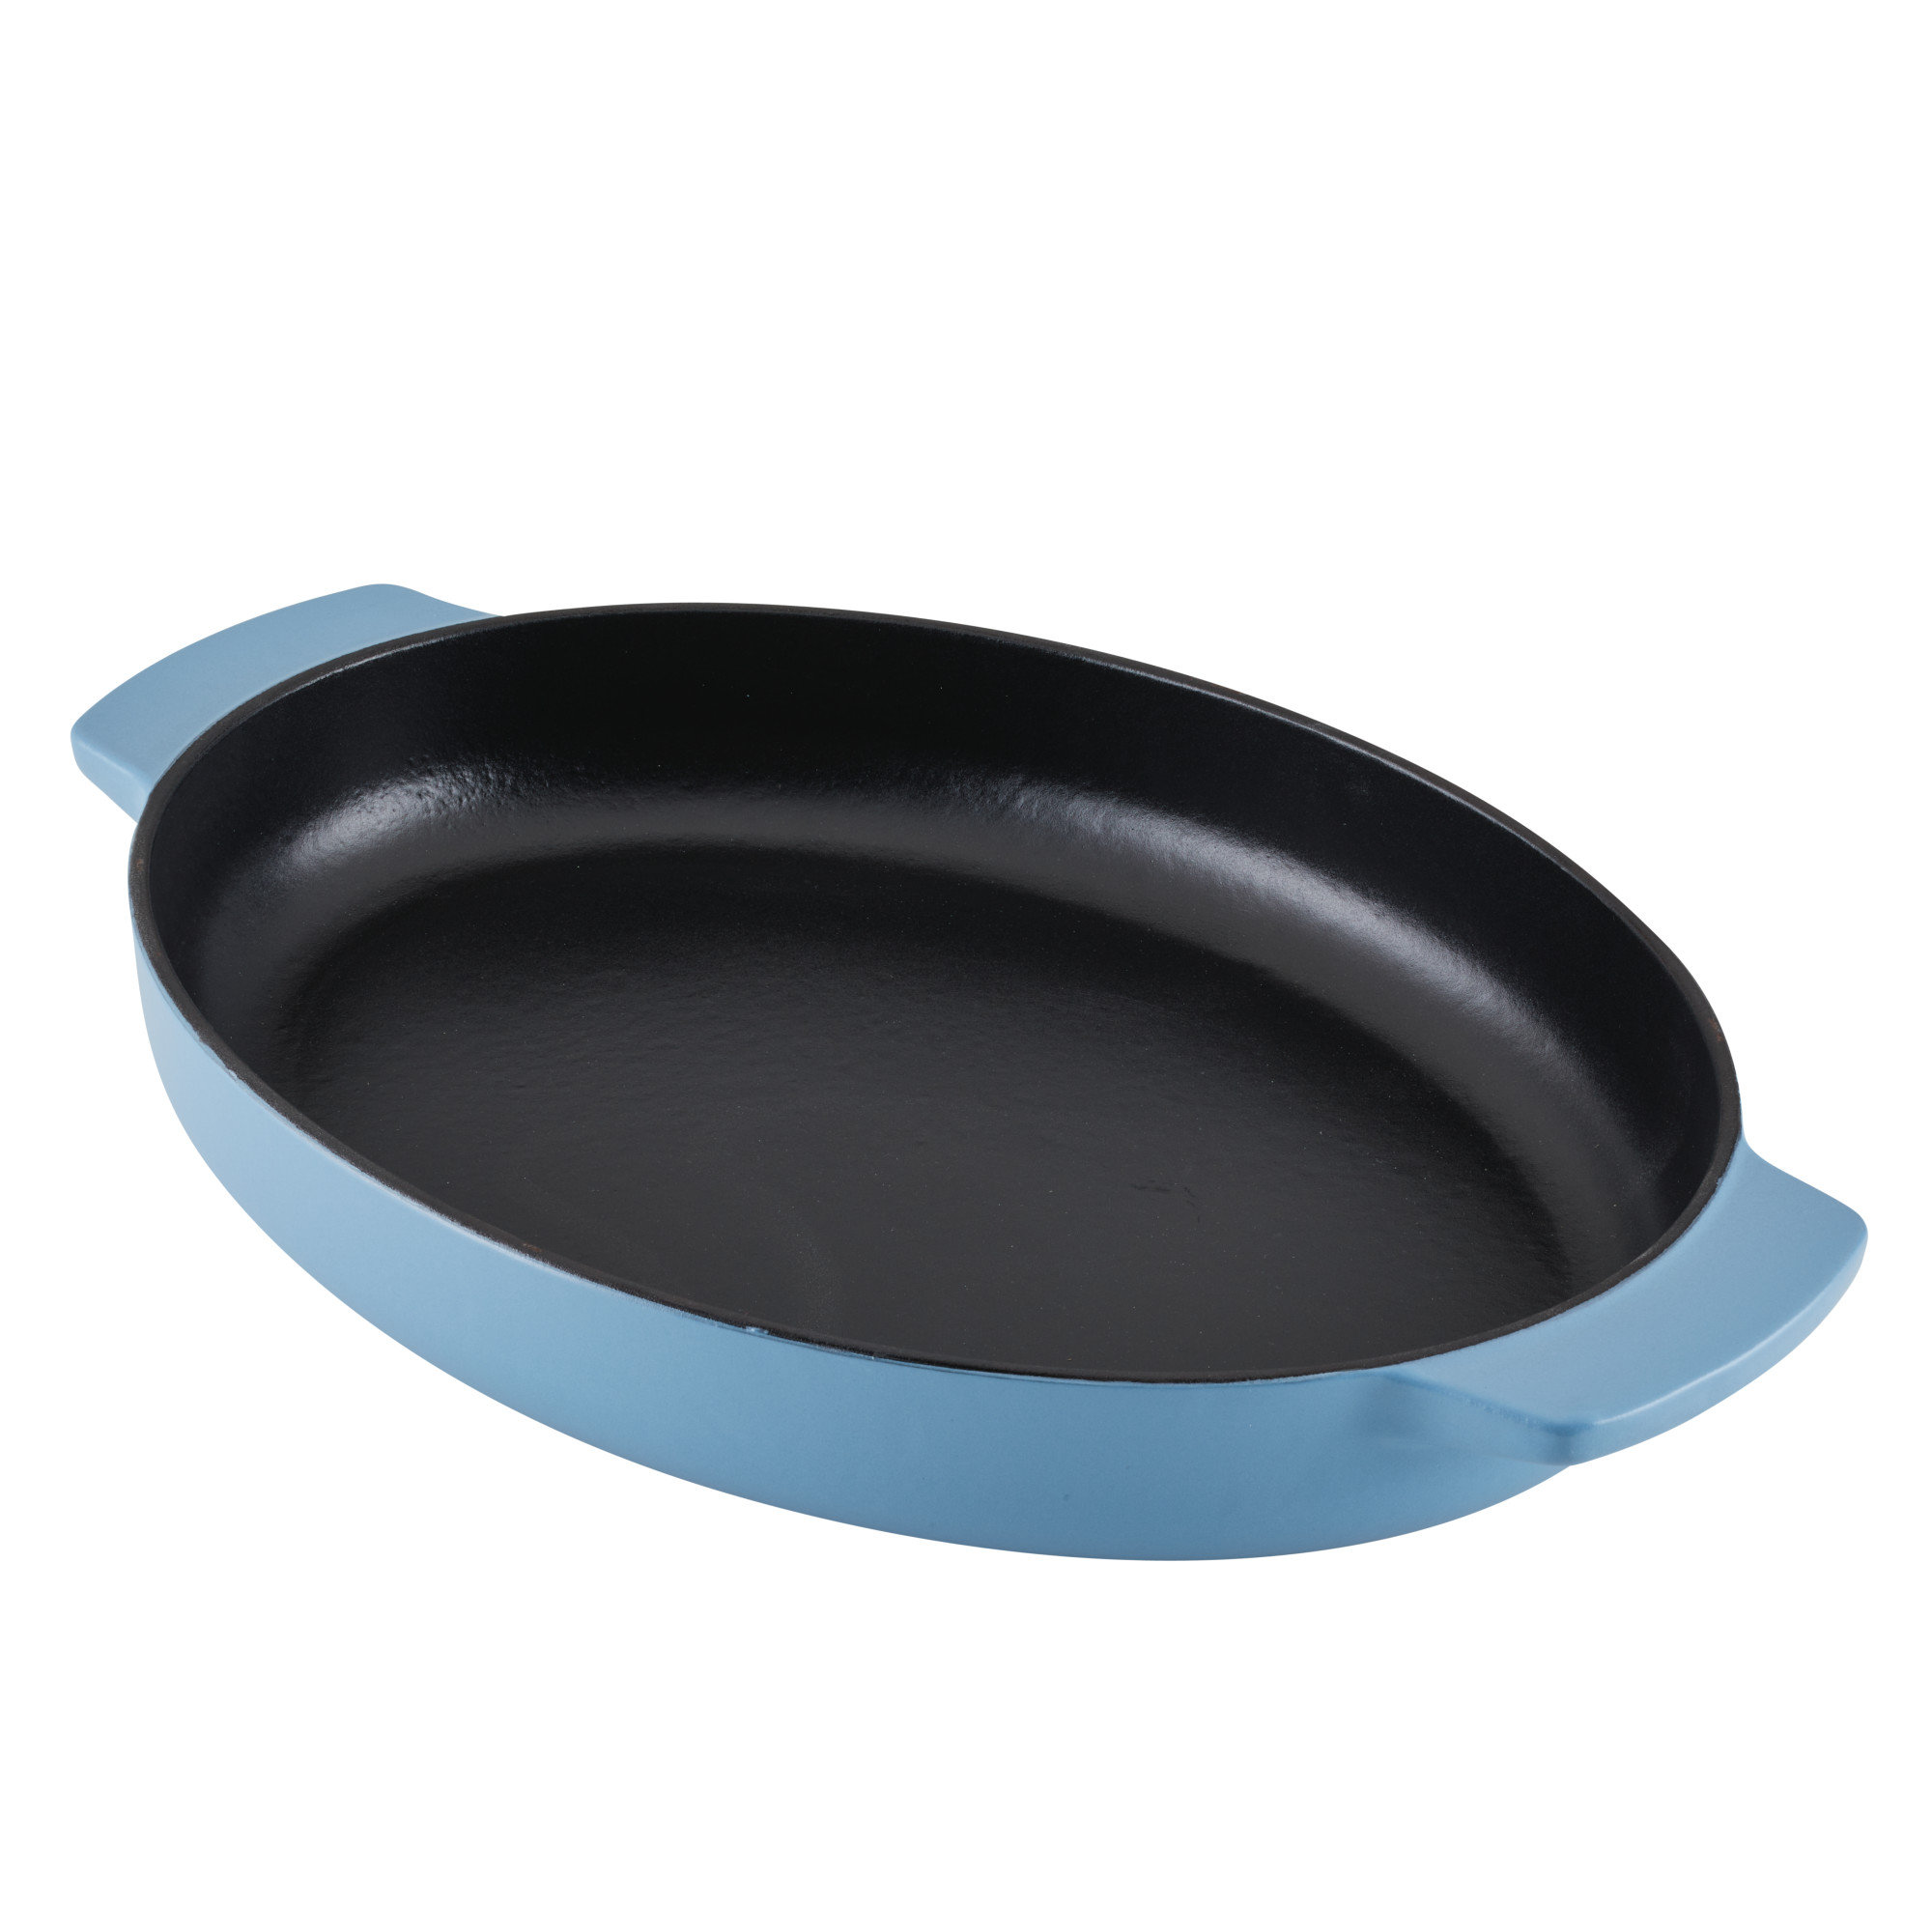 Nonstick Square Electric Skillet with Glass Lid, 12 Inches, Teal -  AliExpress